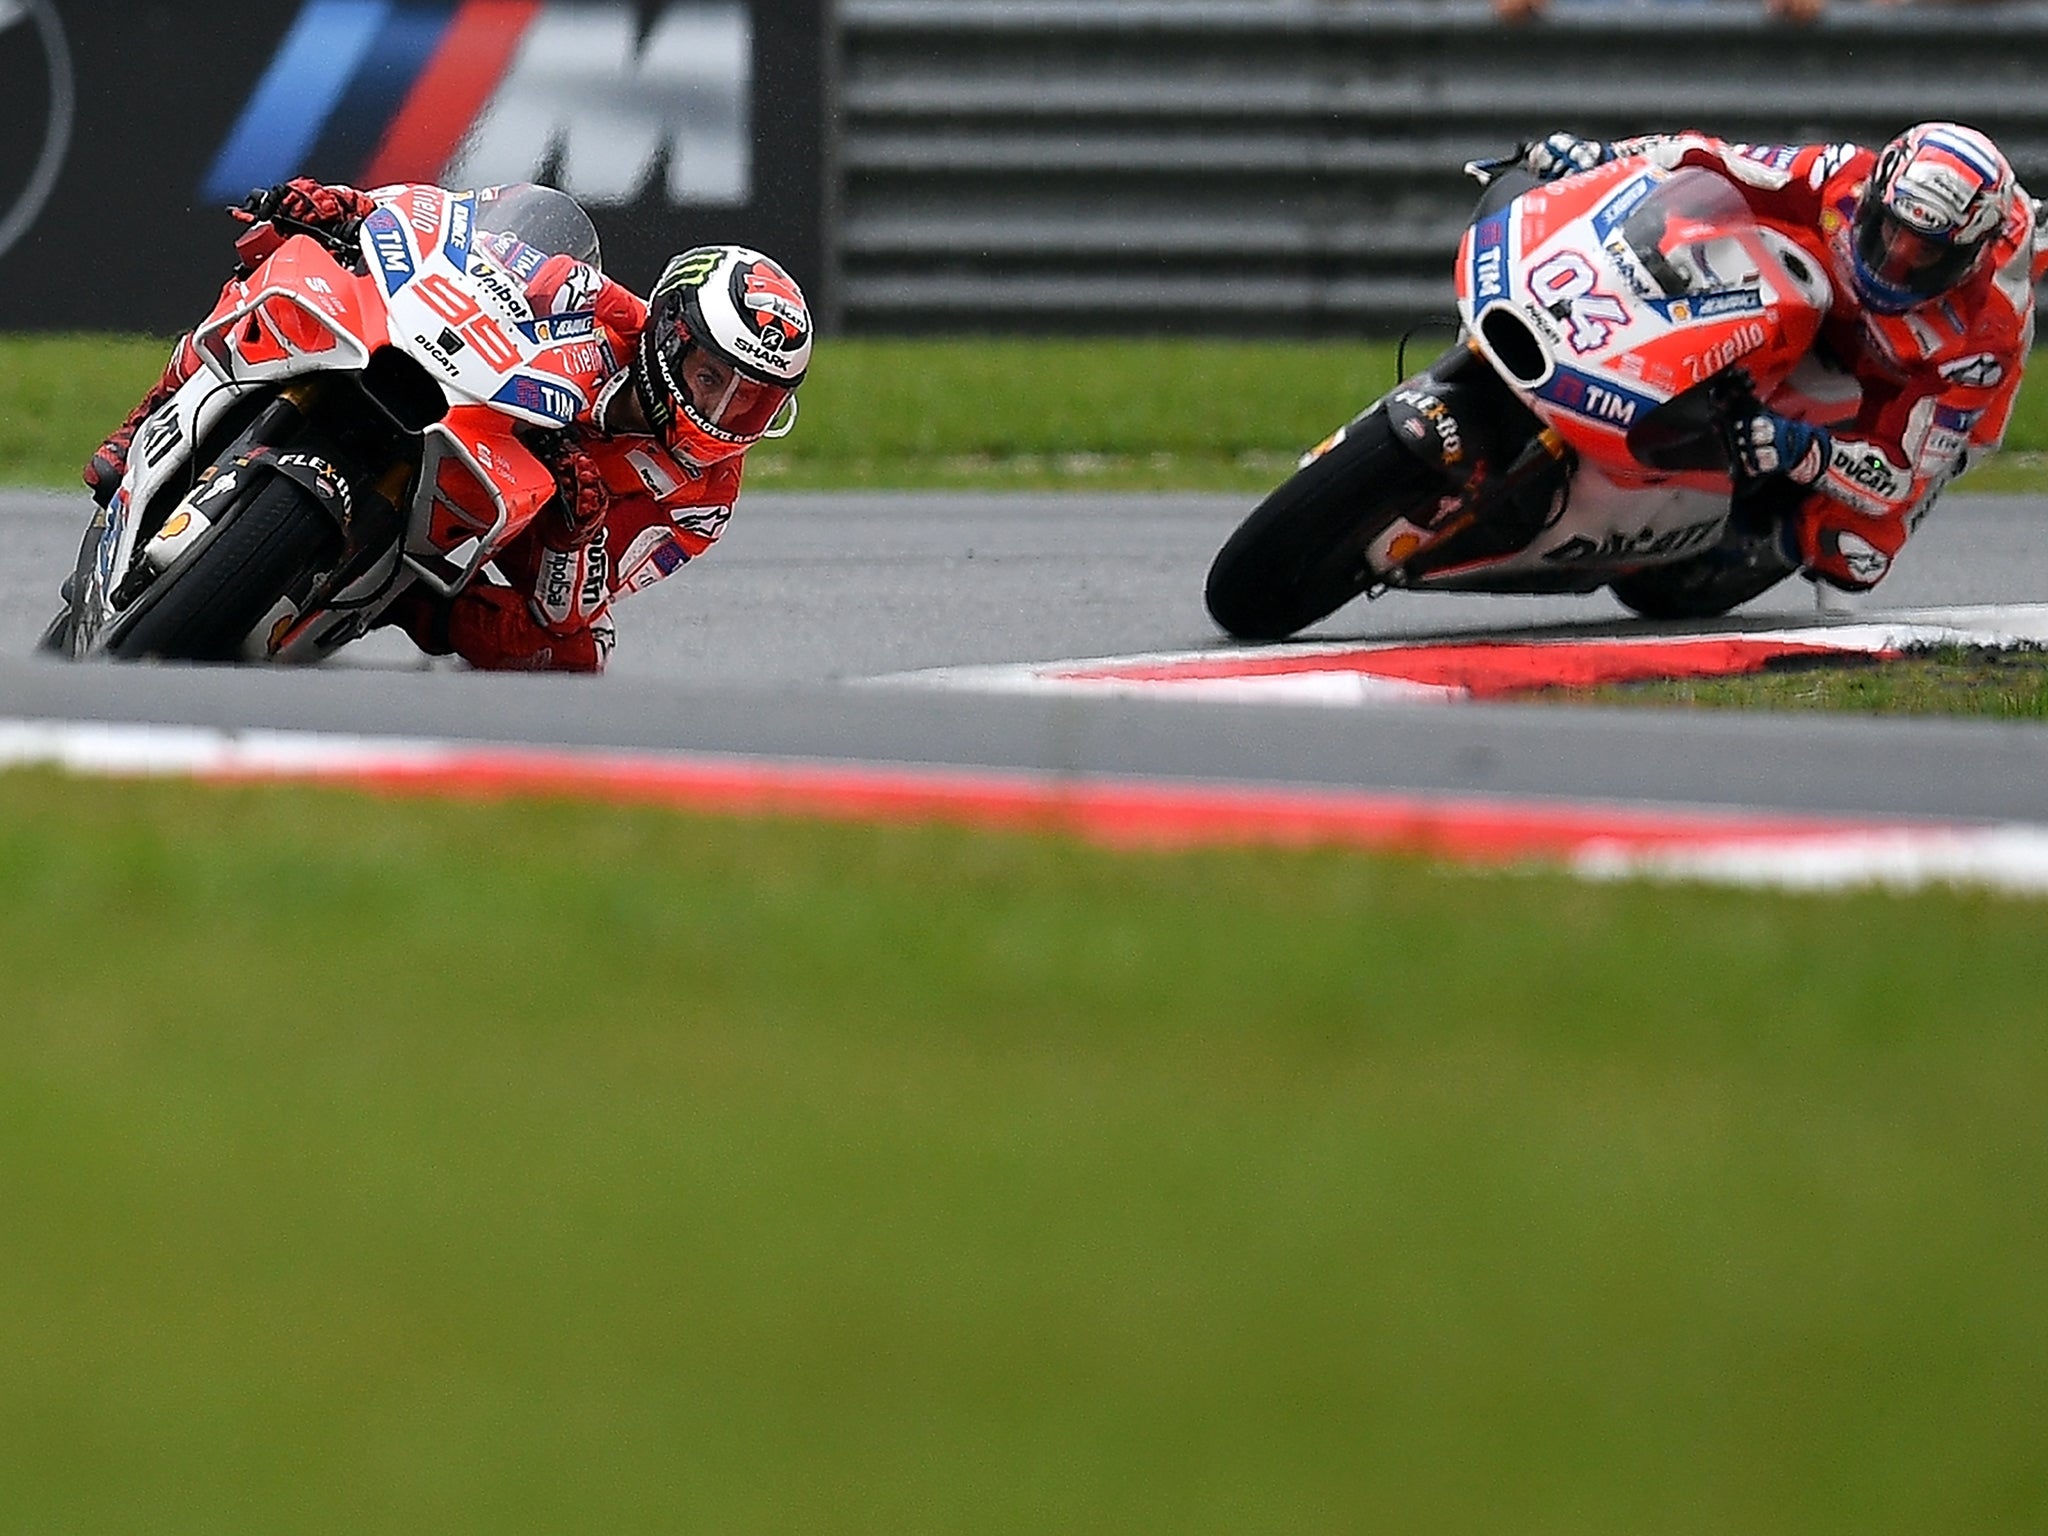 Ducati claimed a one-two finish as Jorge Lorenzo came home in second